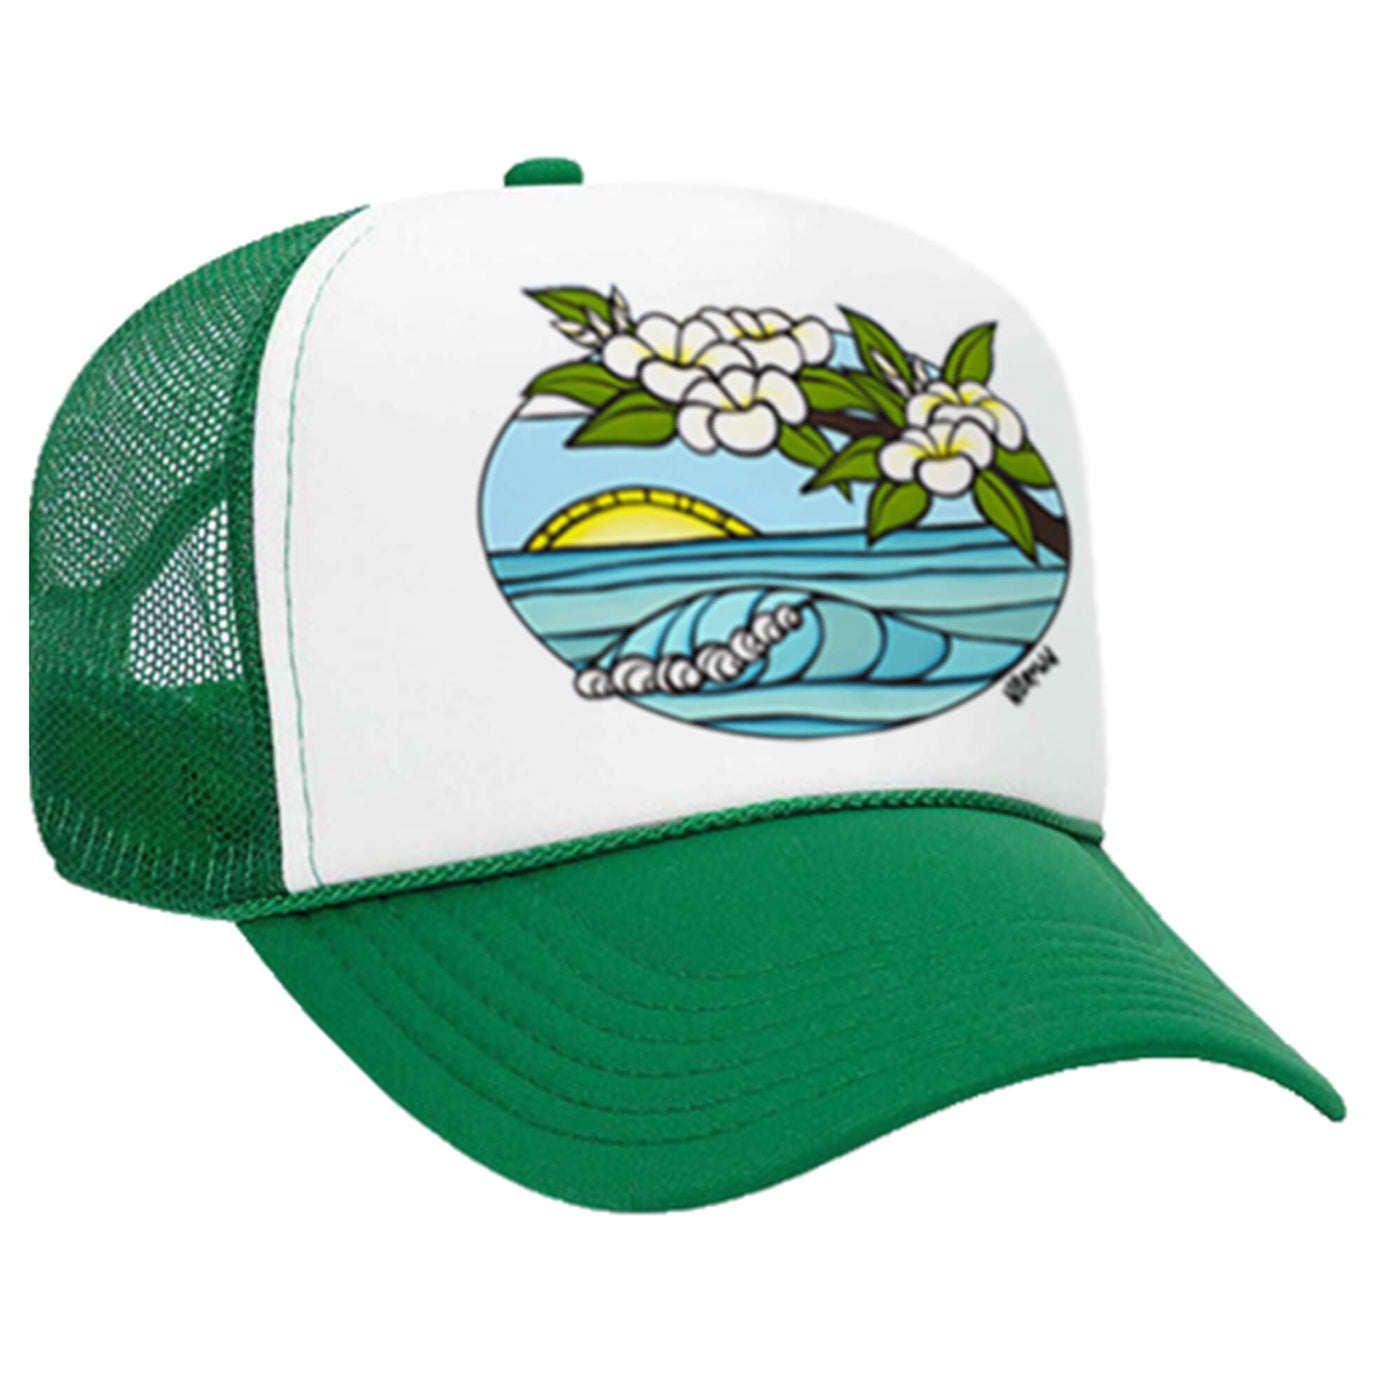 A green trucker hat featuring a sunrise with rolling waves and plumeria flowers by Hawaii surf artist Heather Brown